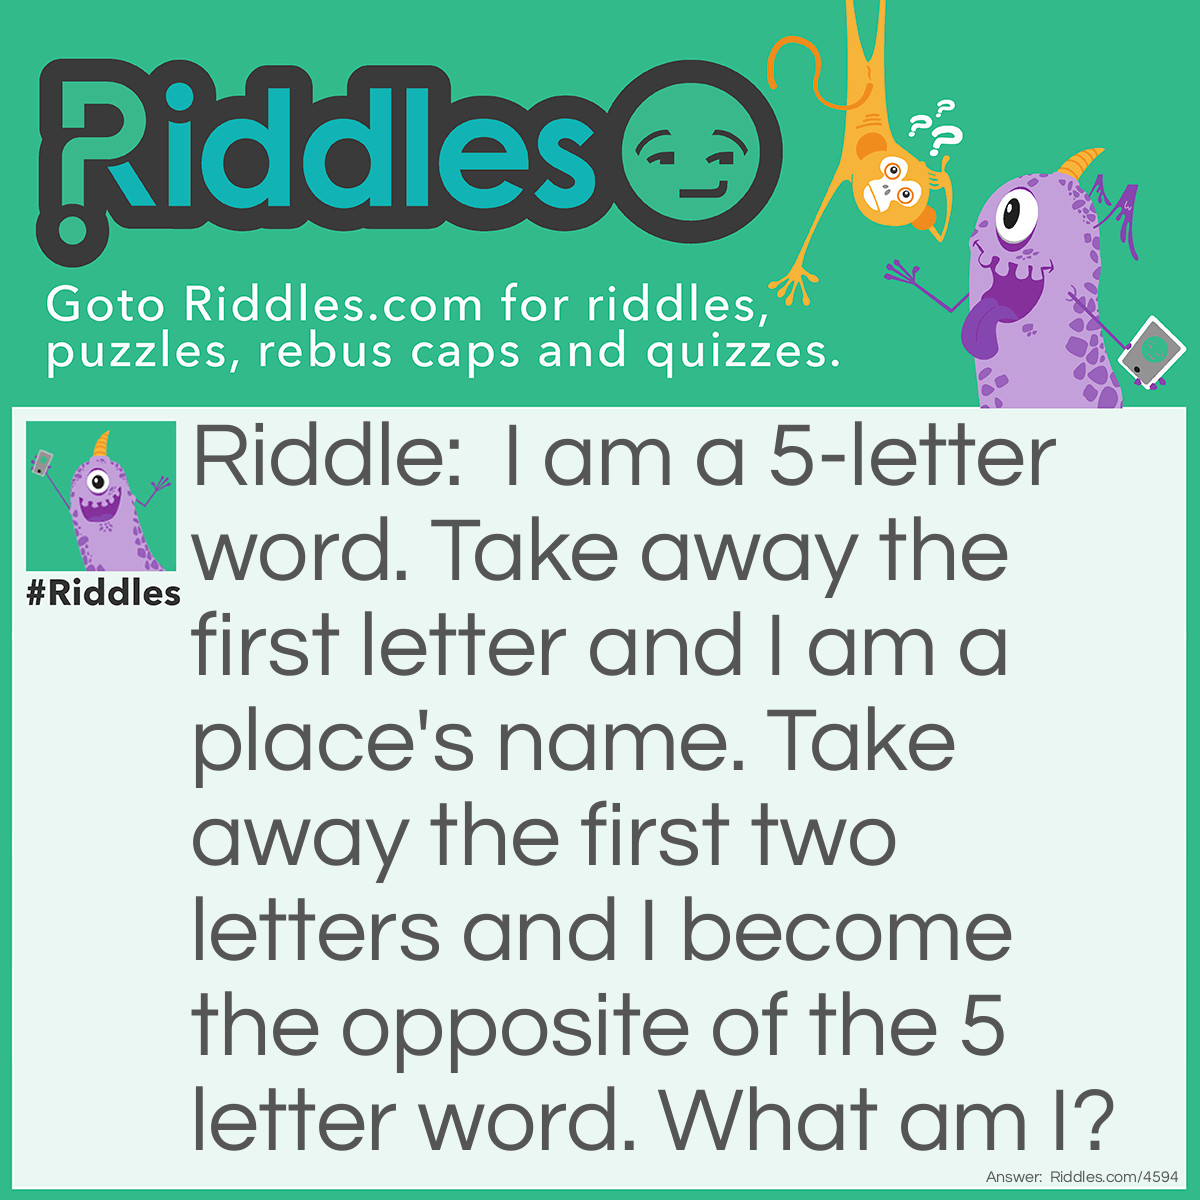 Riddle: I am a 5 letter word. Take away the first letter and I am a place's name. Take away the first two letters and I become the opposite of the 5 letter word. Who am I? Answer: Woman, oman, man.